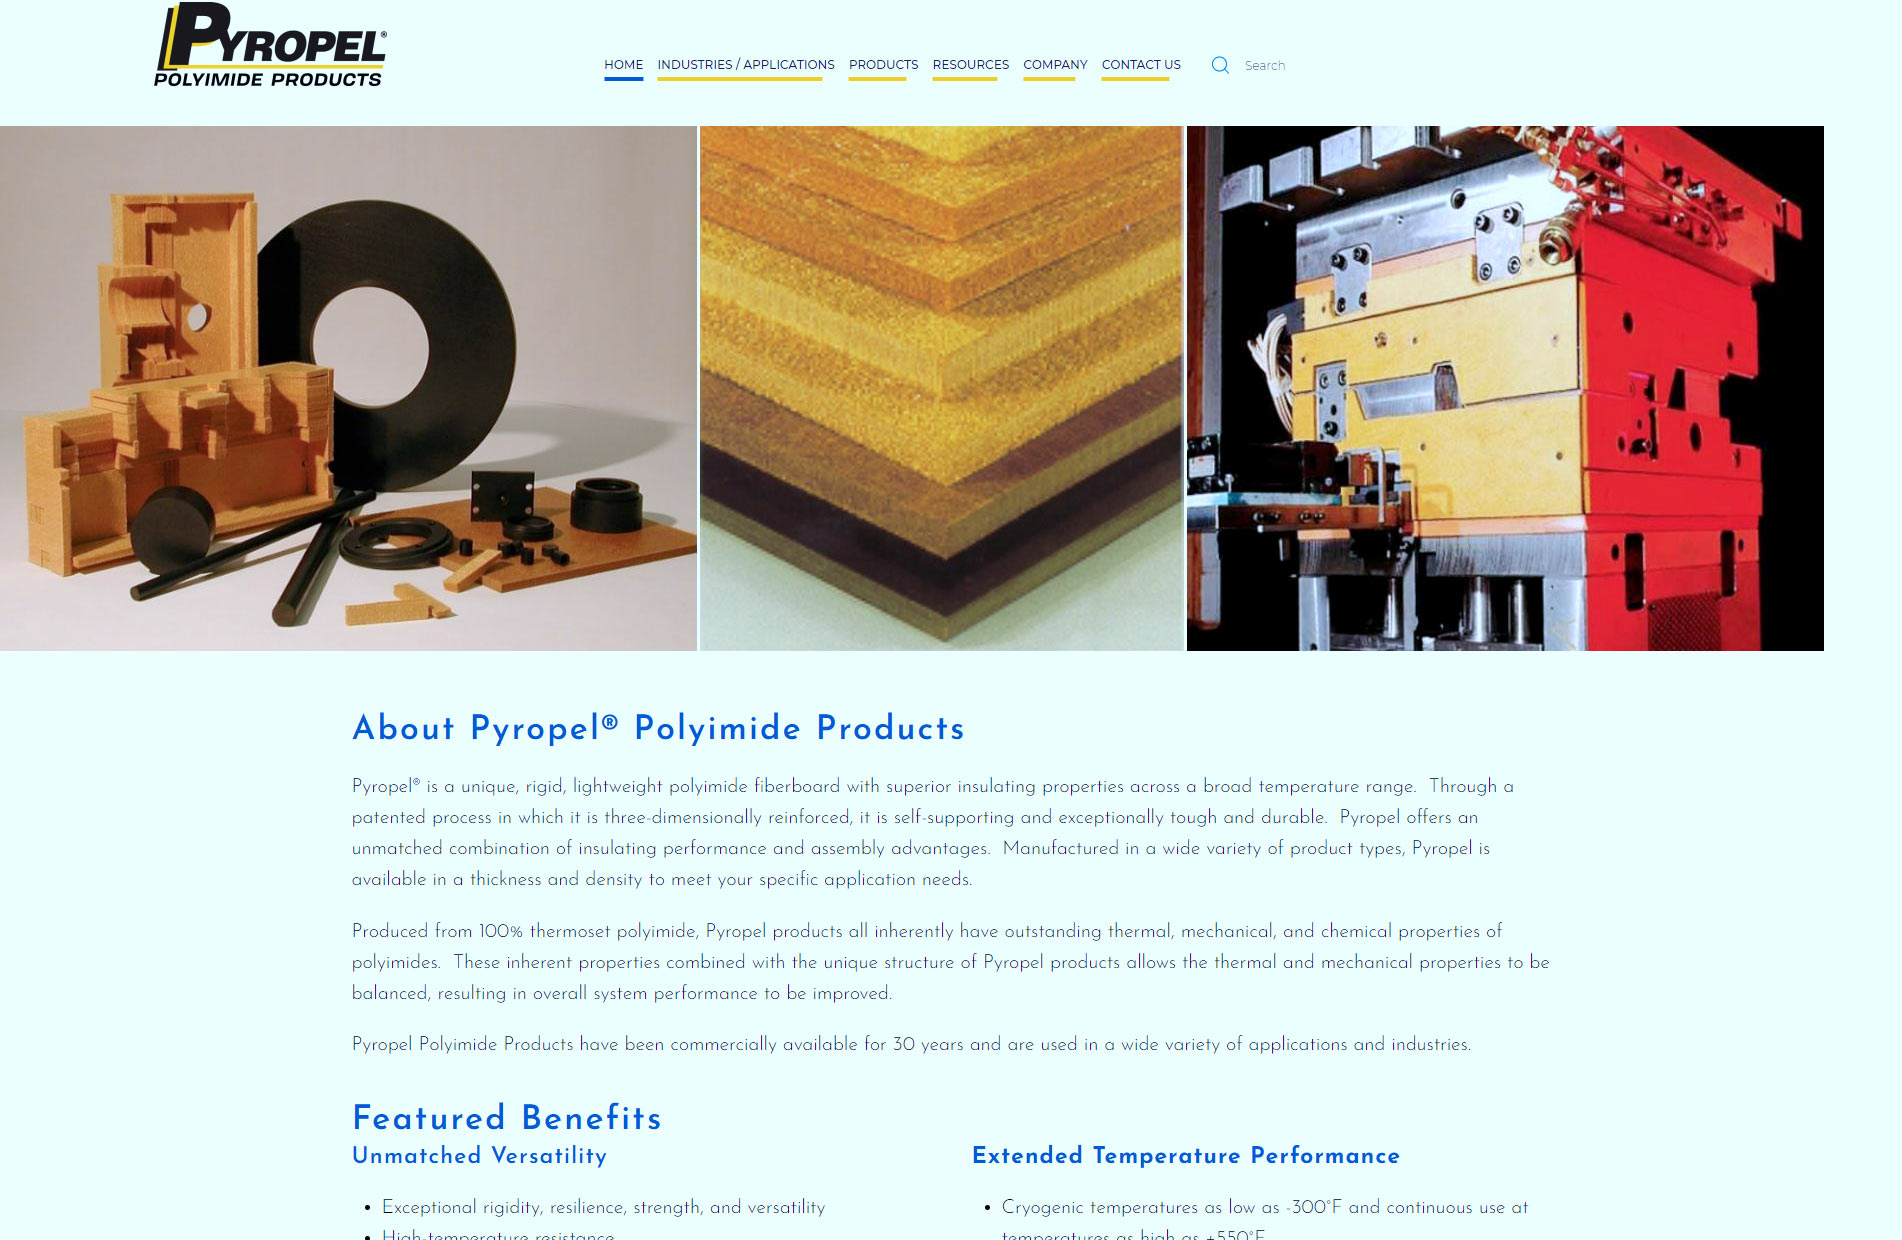 Pyropel® Polyimide Products